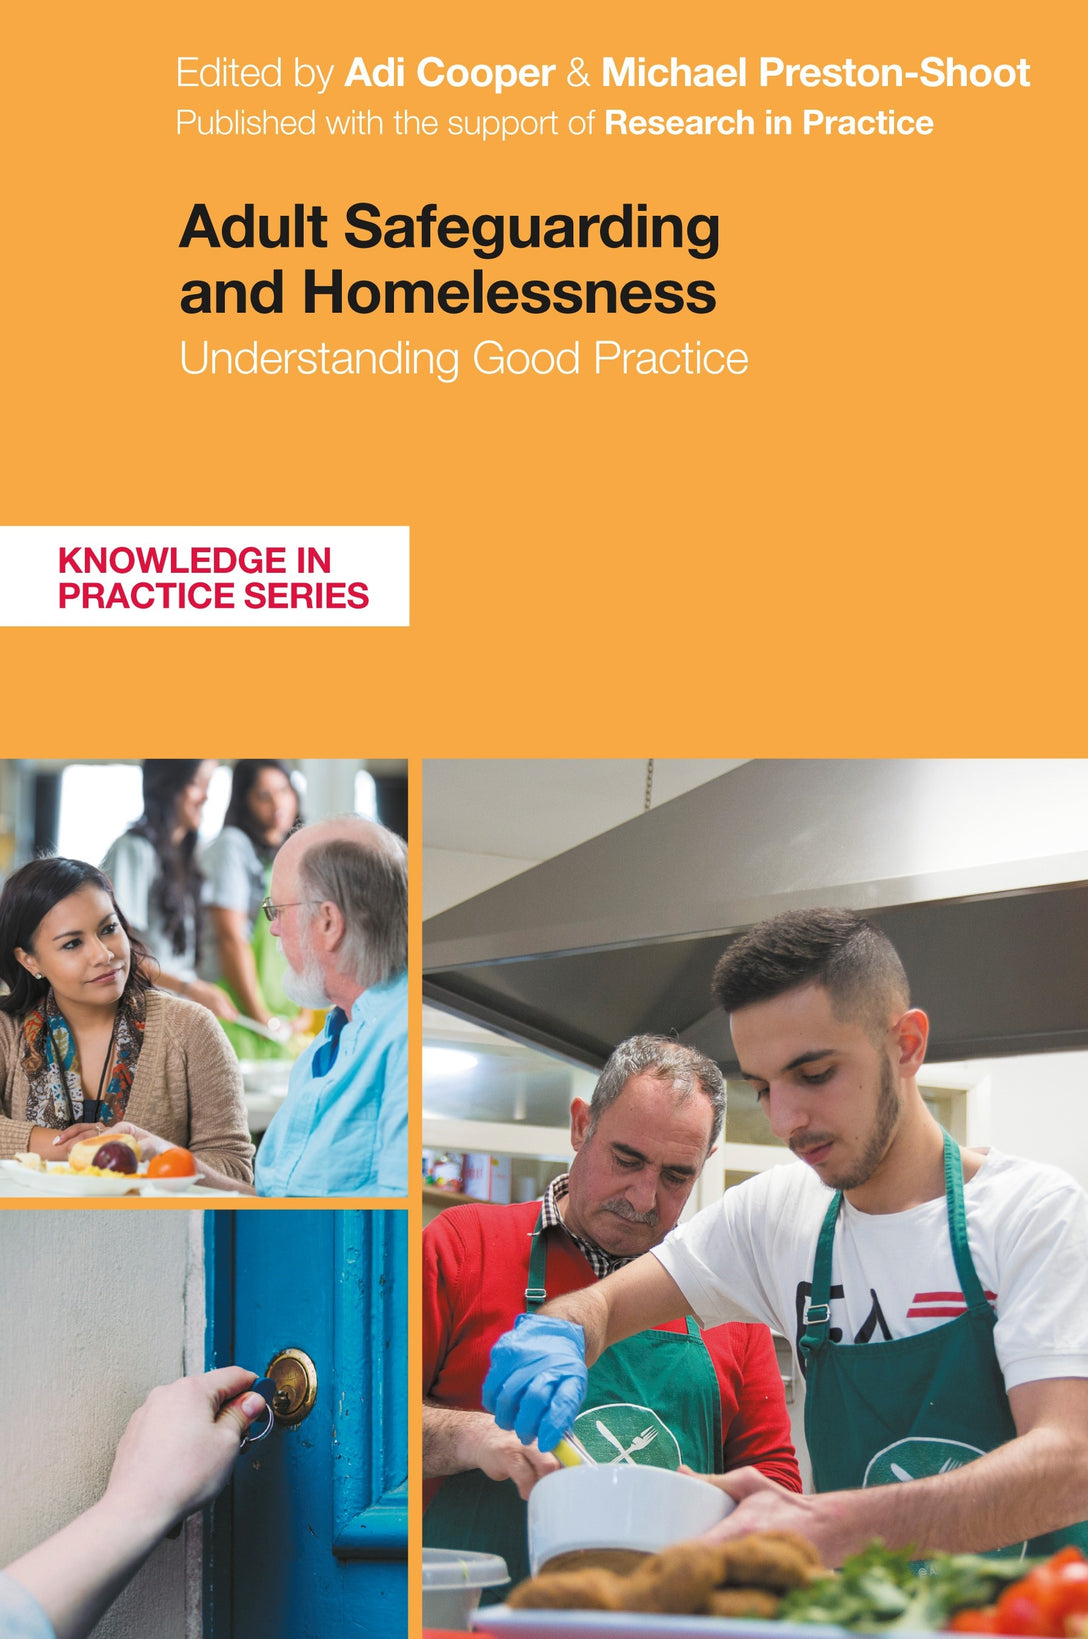 Adult Safeguarding and Homelessness by Adi Cooper, Michael Preston-Shoot, No Author Listed